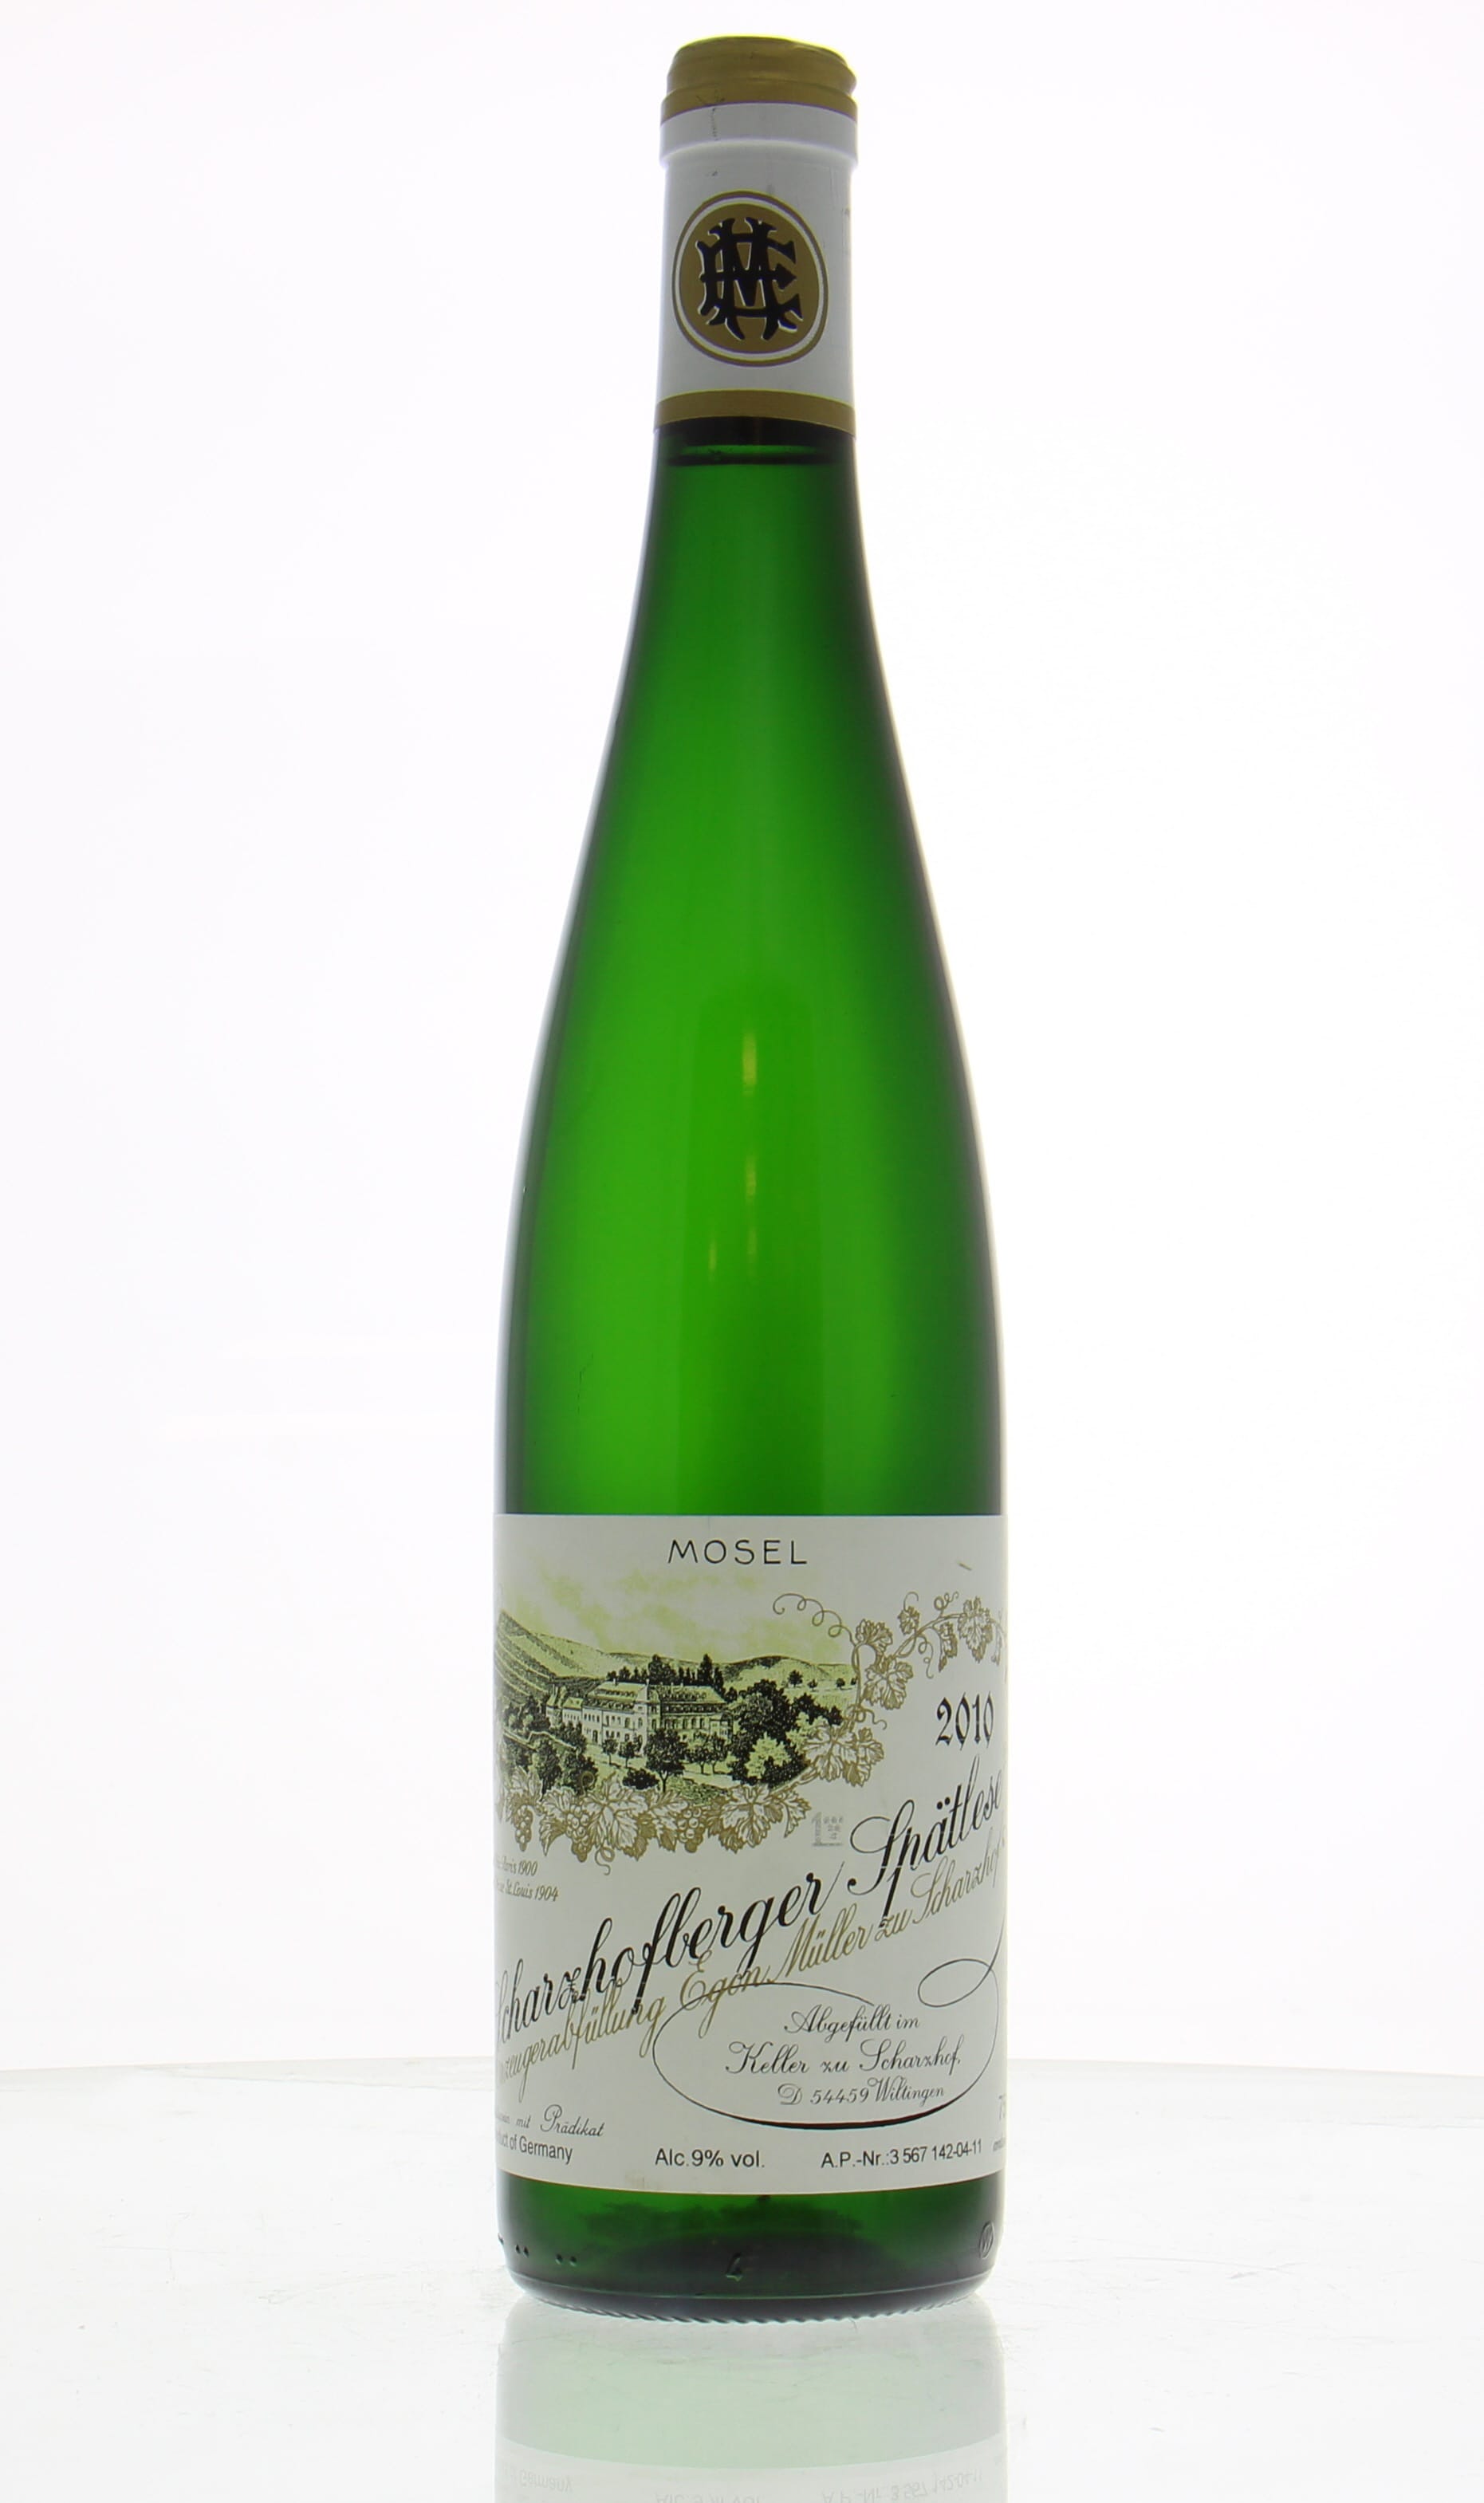 Egon Muller - Scharzhofberger Riesling Spatlese 2010 Perfect